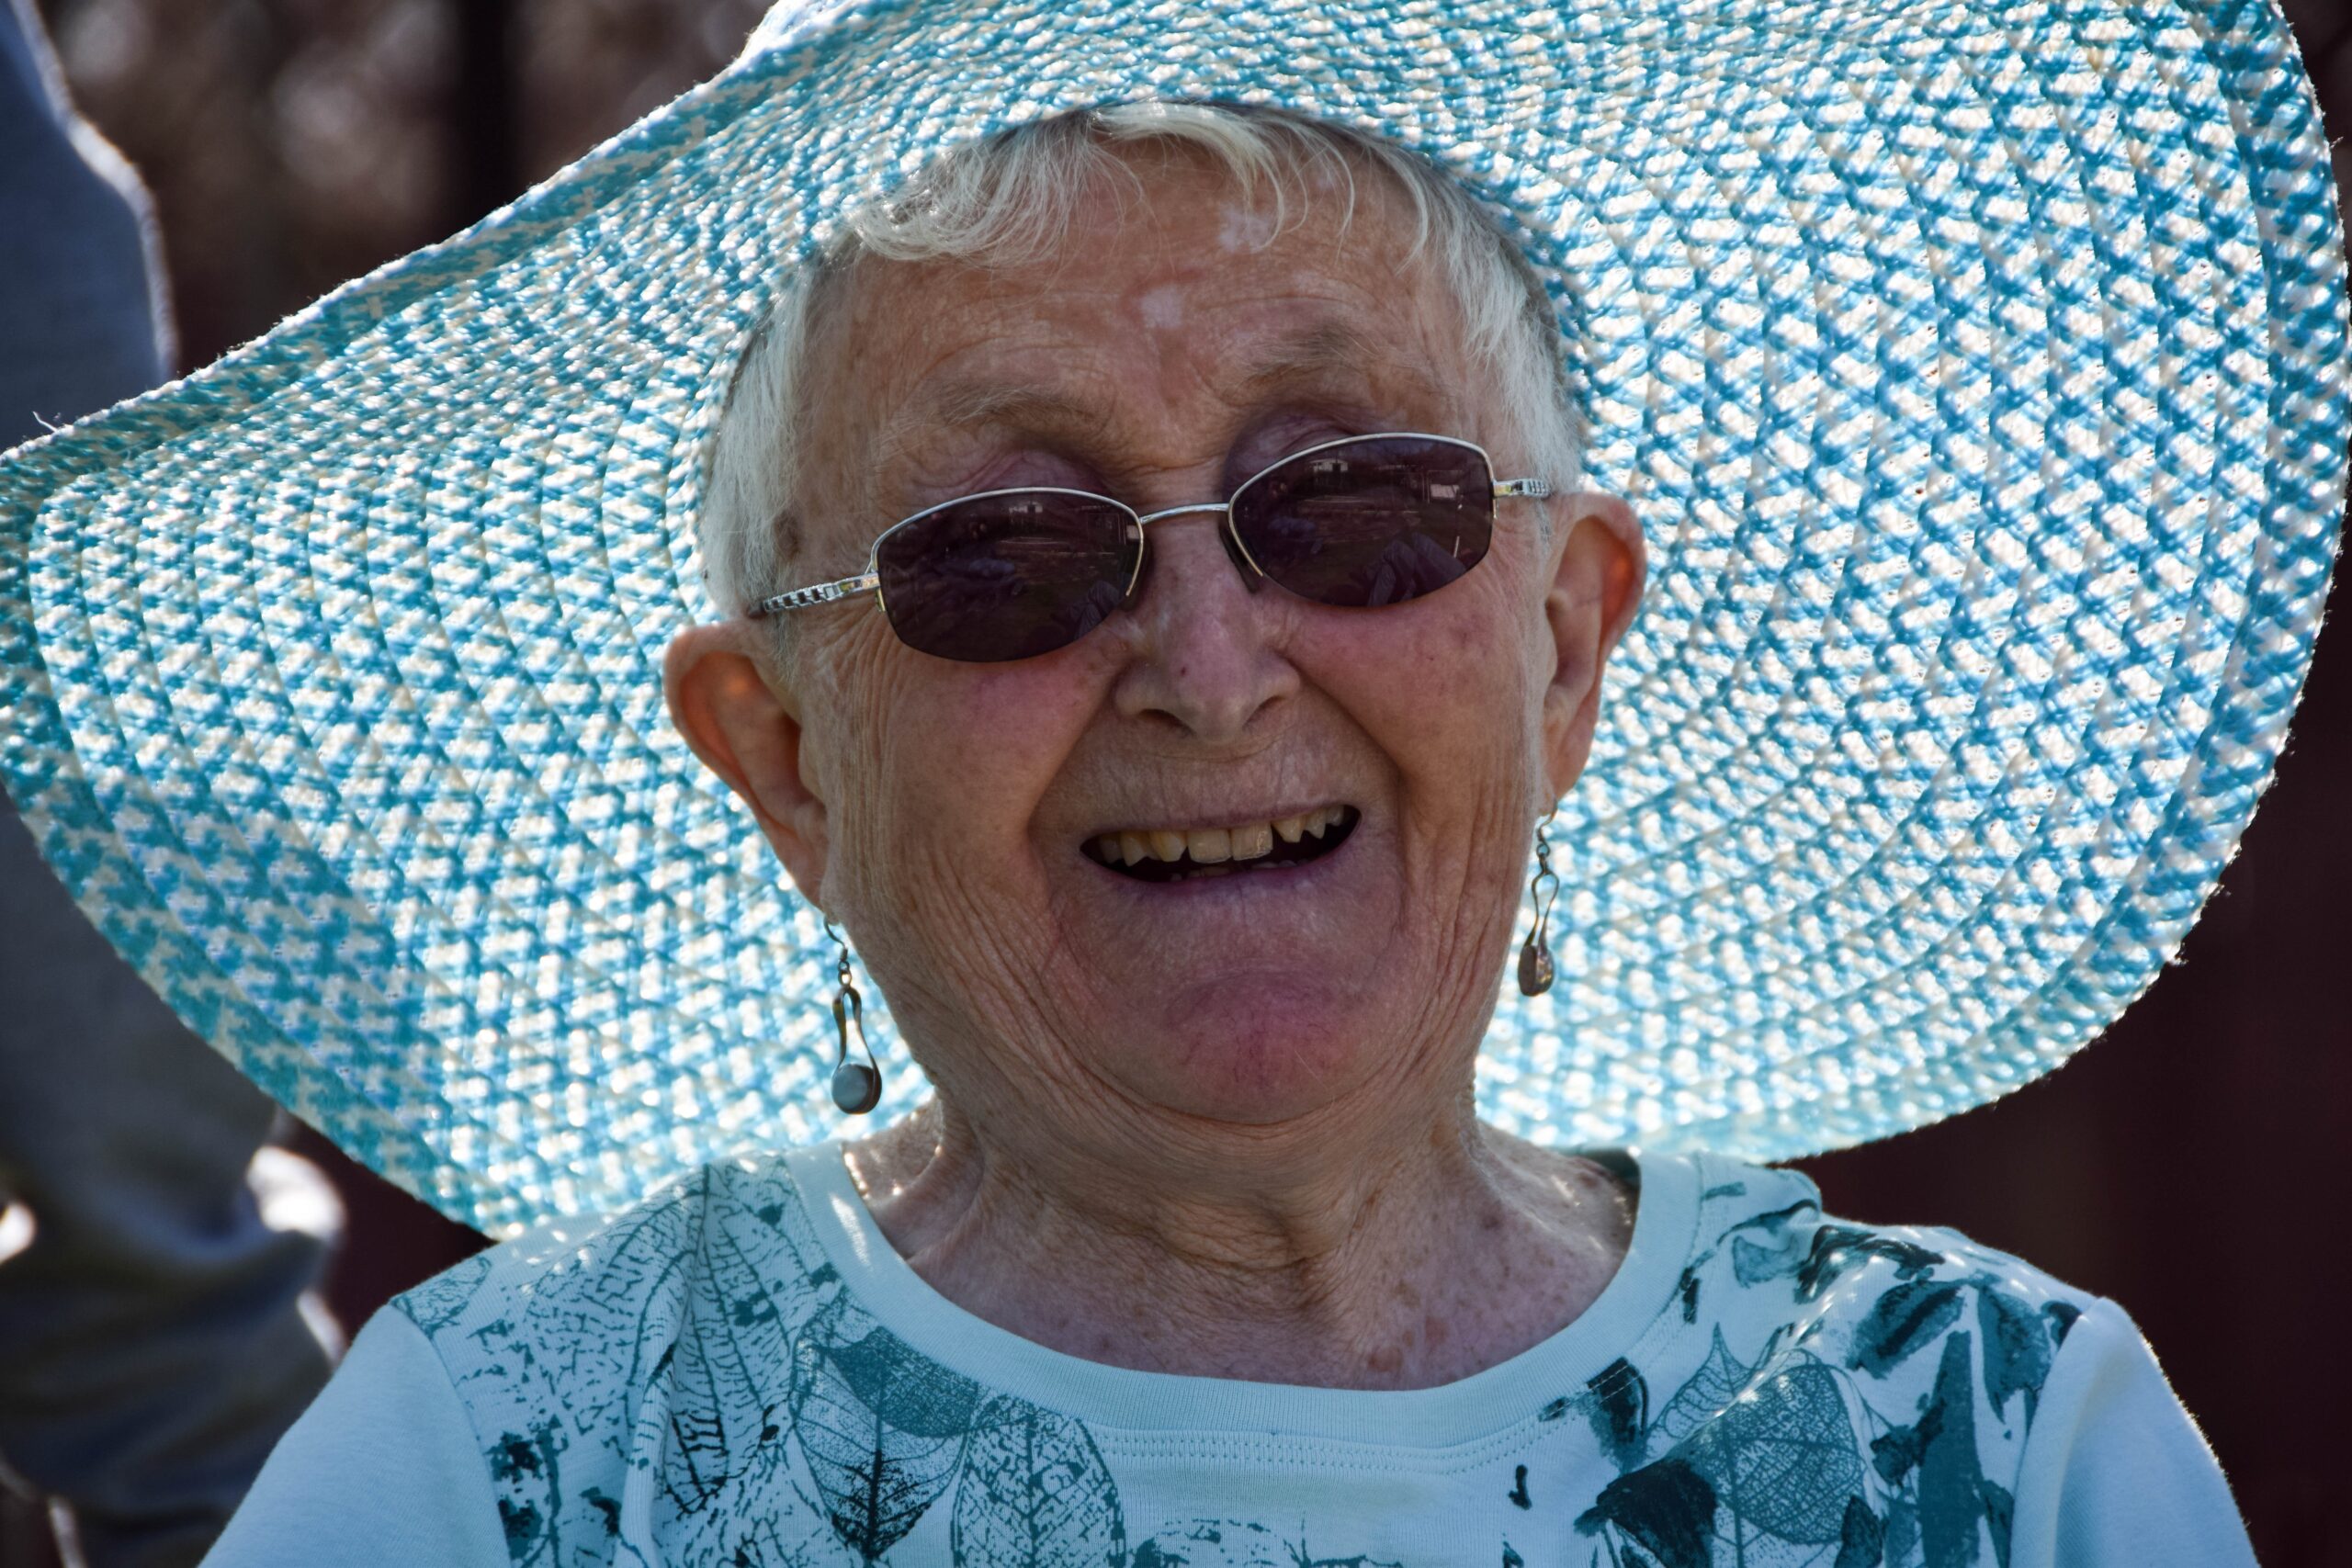 elderly woman smiling and wearing a hat